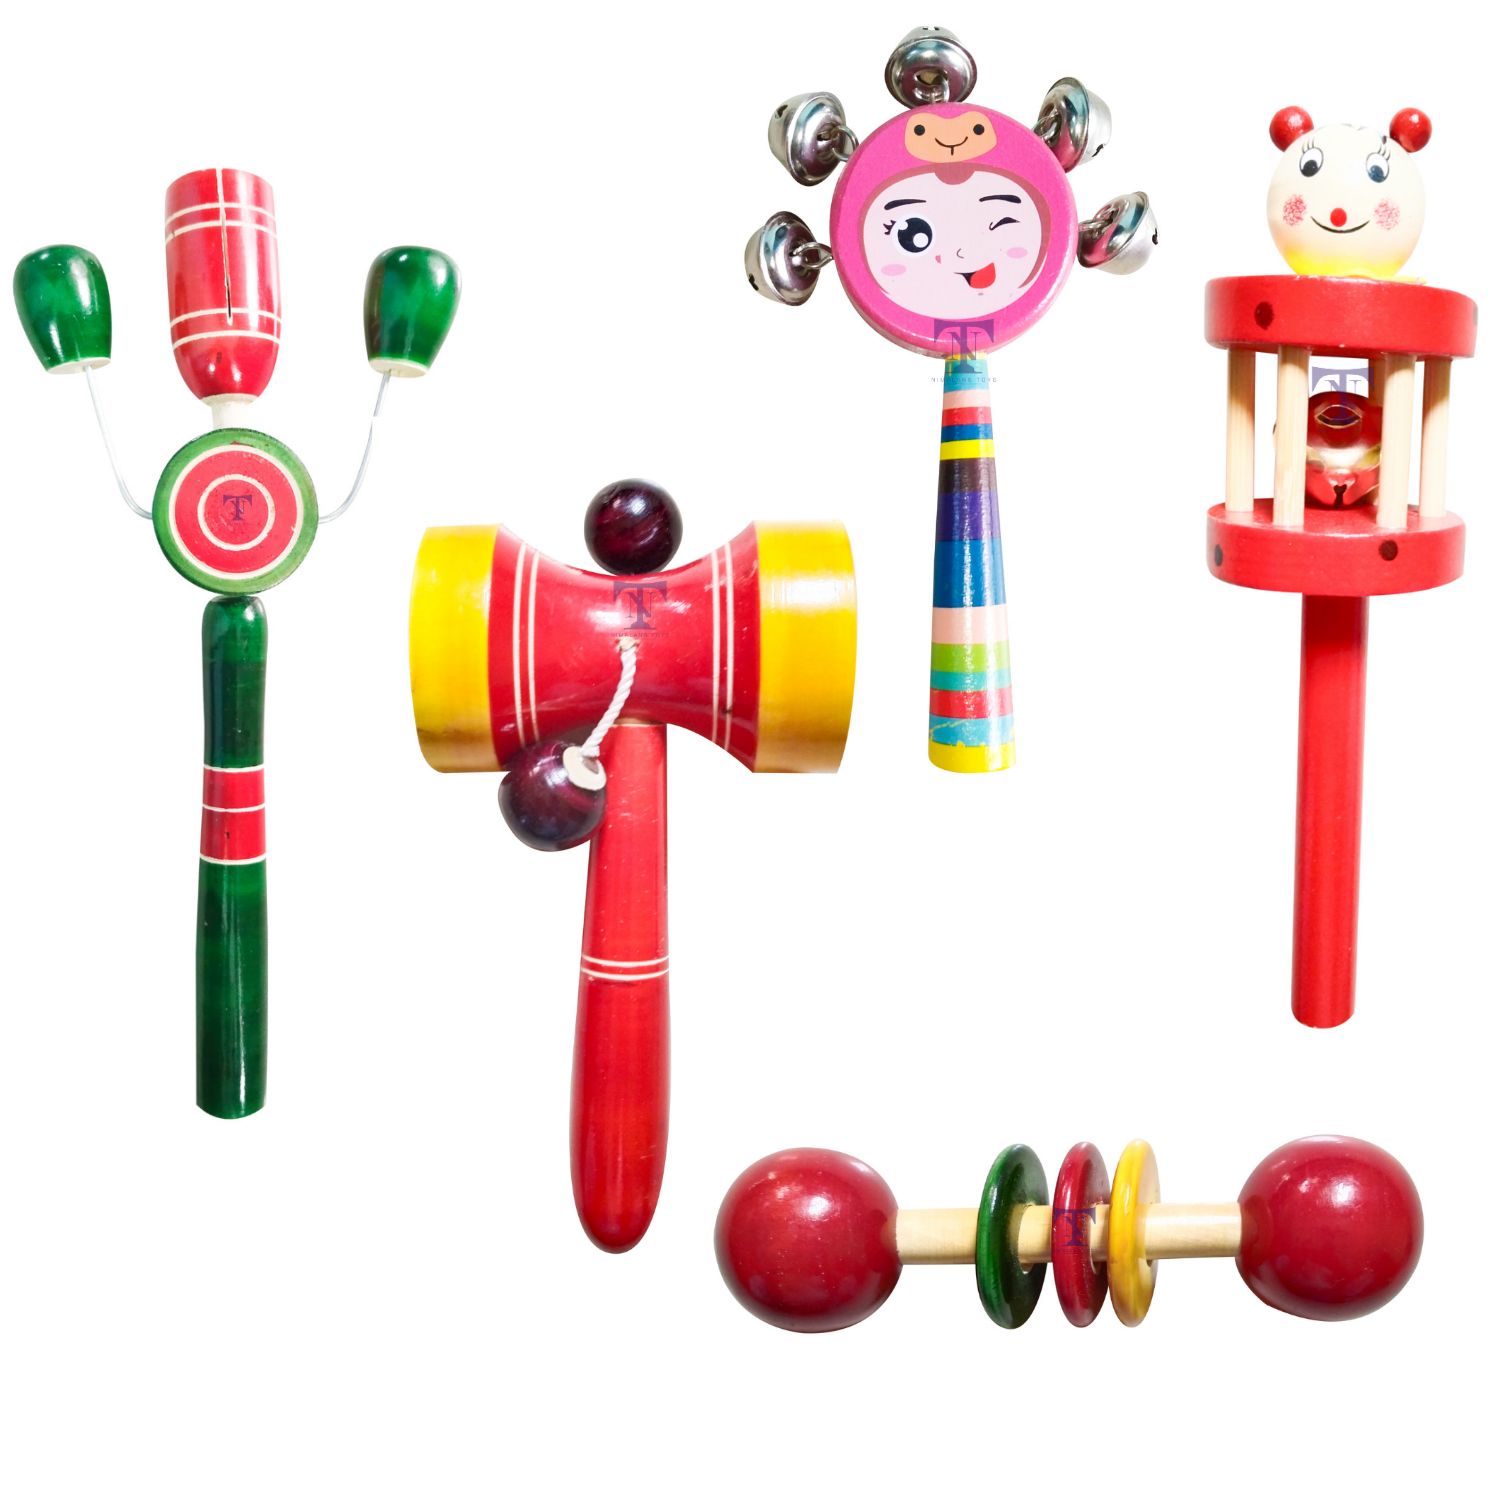 Nimalan's Toys Colourful Wooden Baby Rattle Toy - Hand Crafted Rattle Set for Kids - Musical Toy for Newly Born - Pack of 5(cage,face,dumurga,TIK S,teether spl)